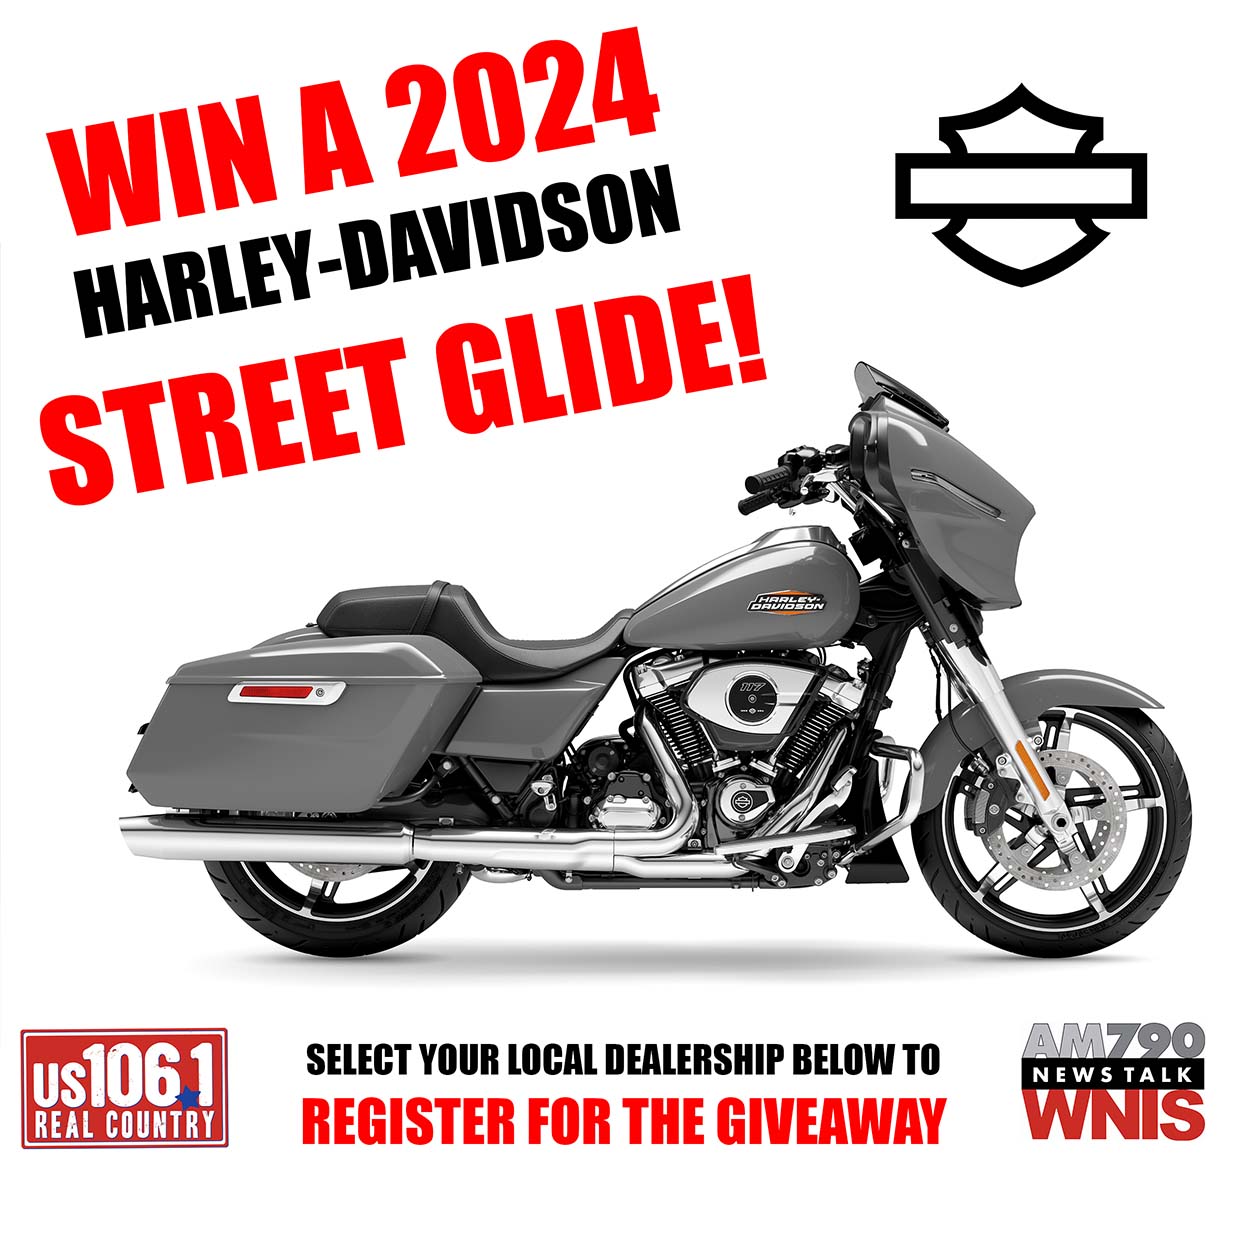 Select your local dealership below to register to win a 2024 Street Glide